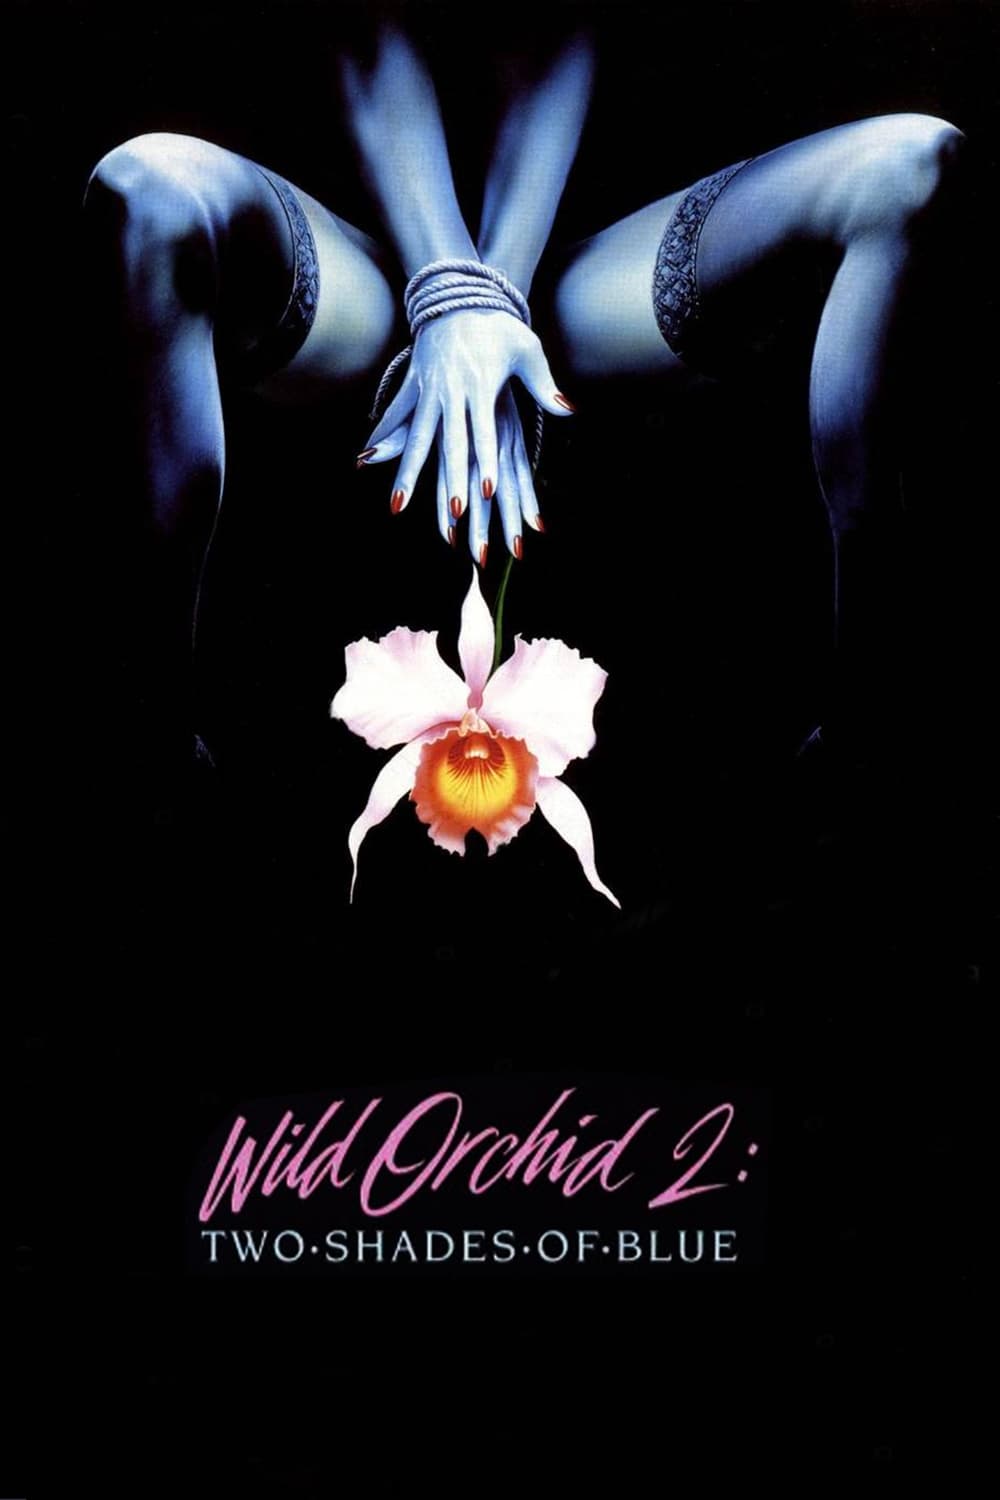 Wild Orchid II: Two Shades of Blue (Wild Orchid II: Two Shades of Blue) [1991]